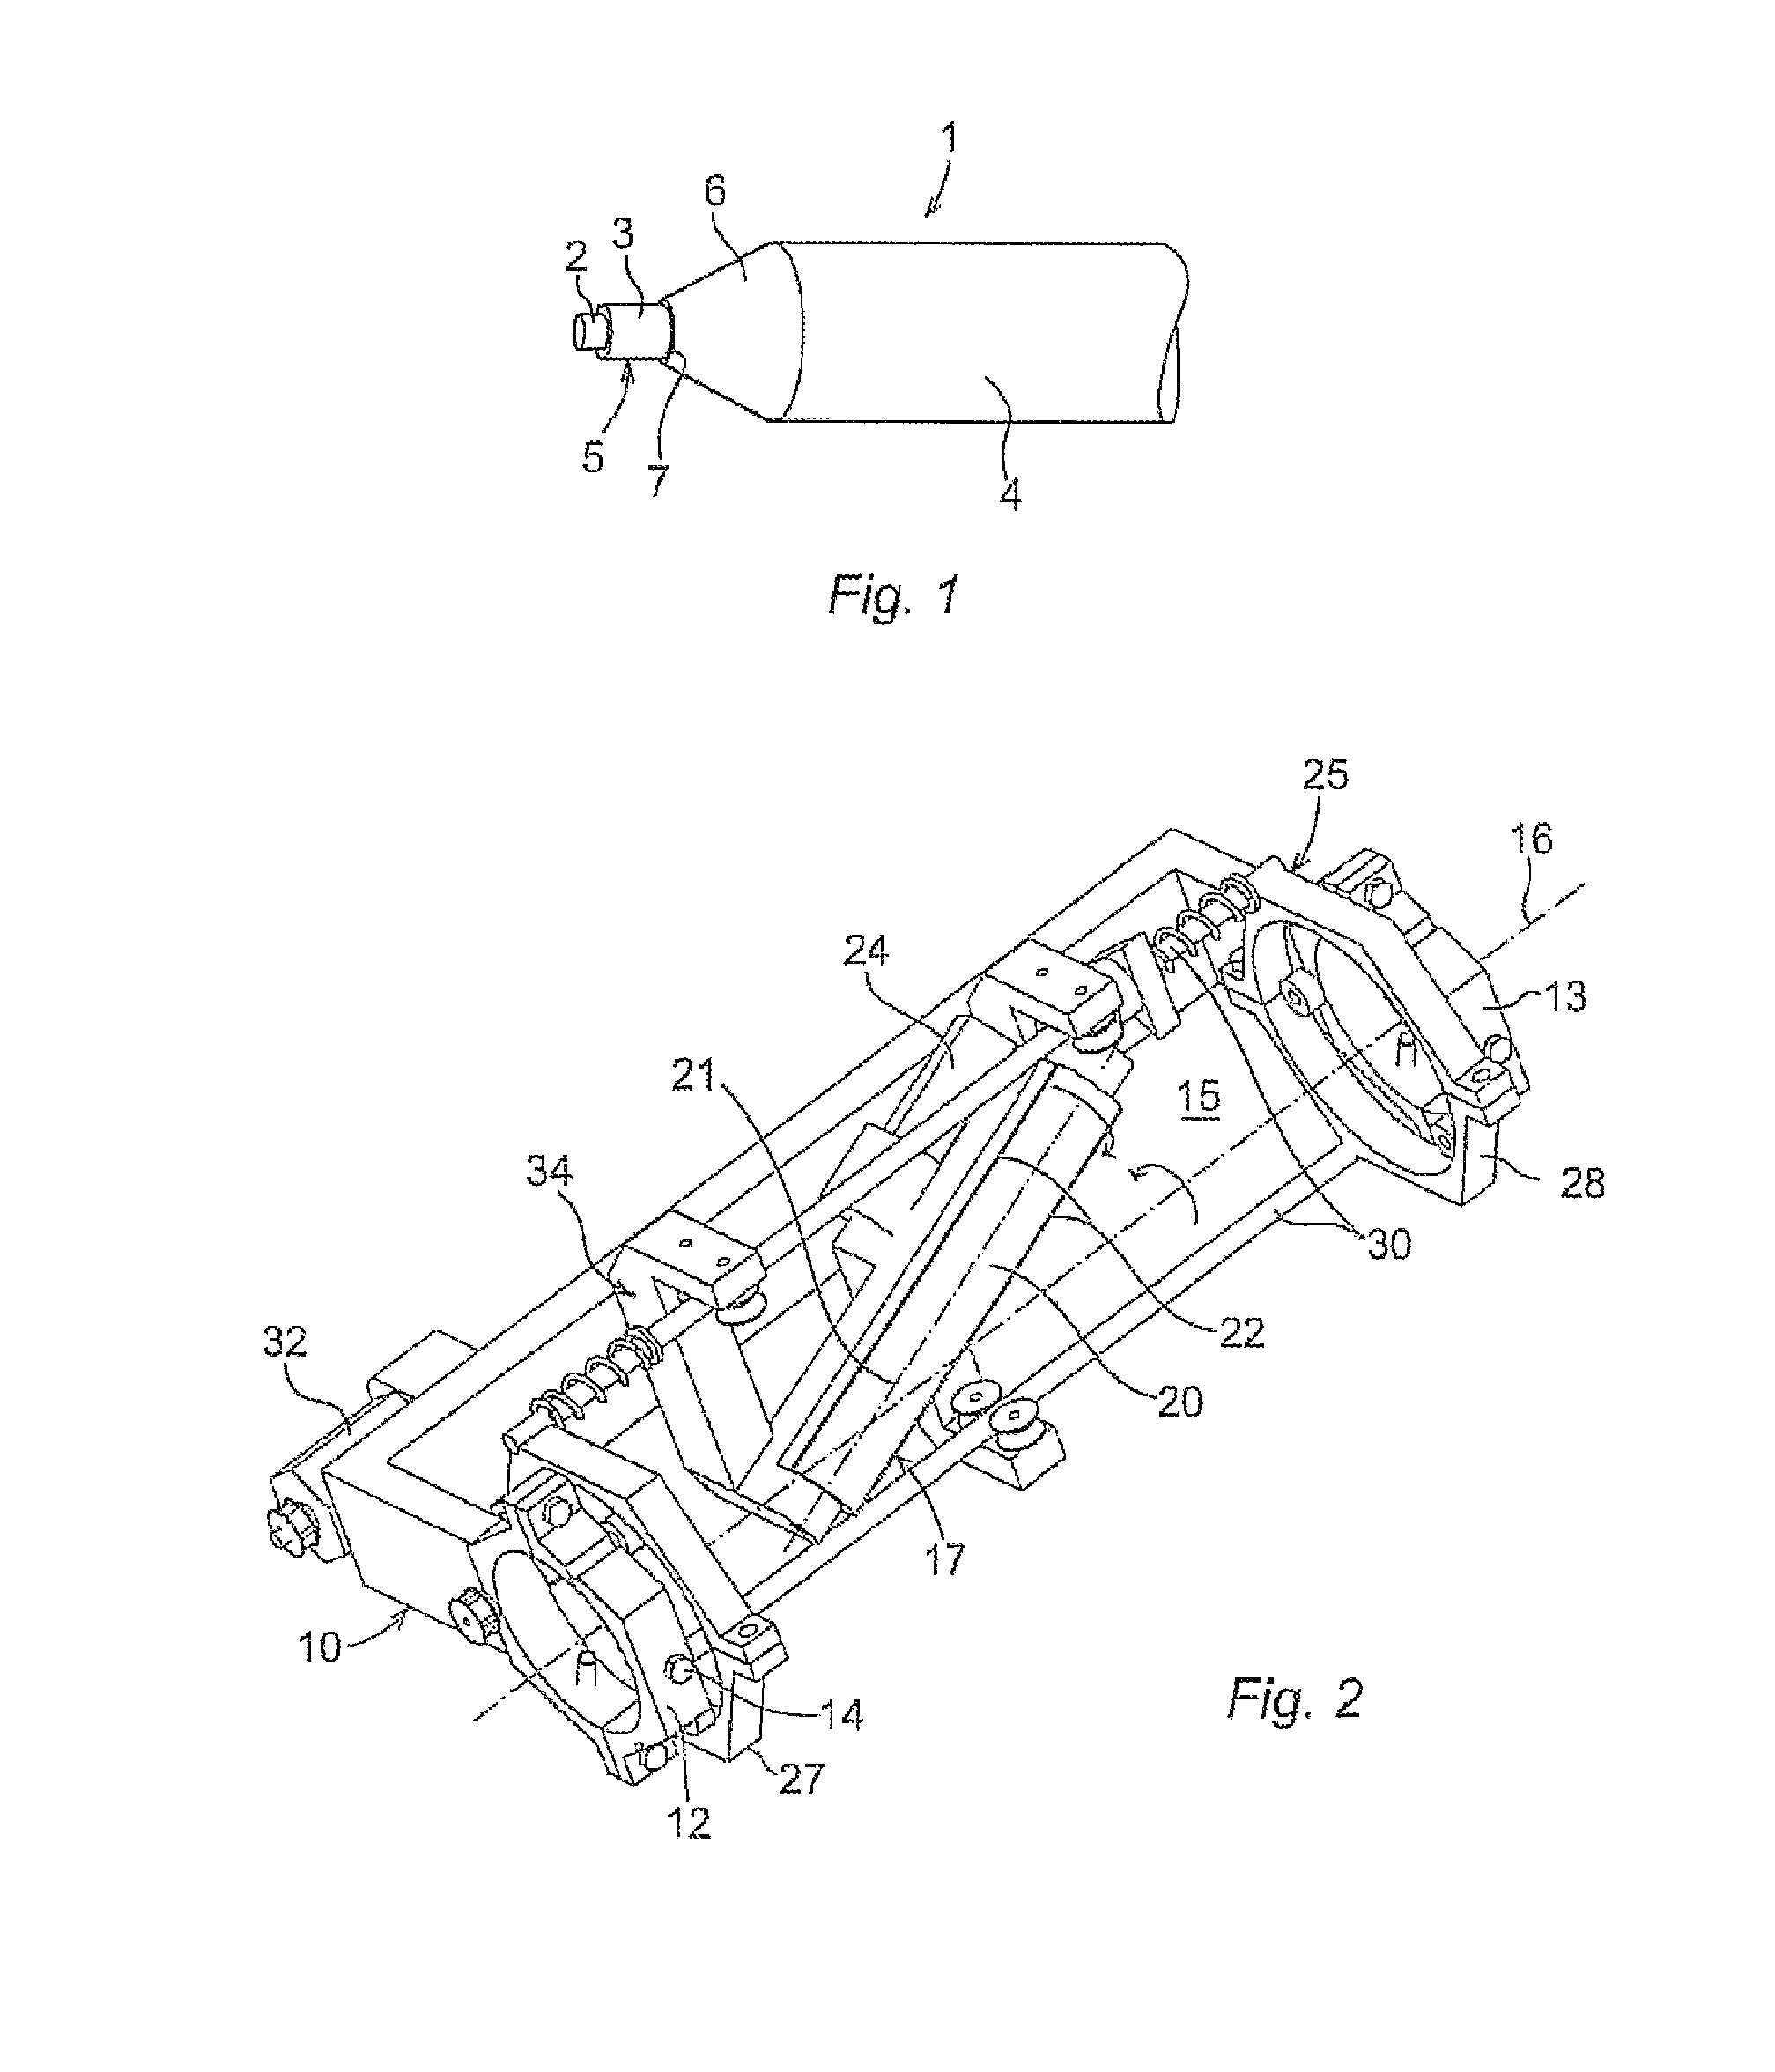 Device And Method For Machining An Electrical Cable